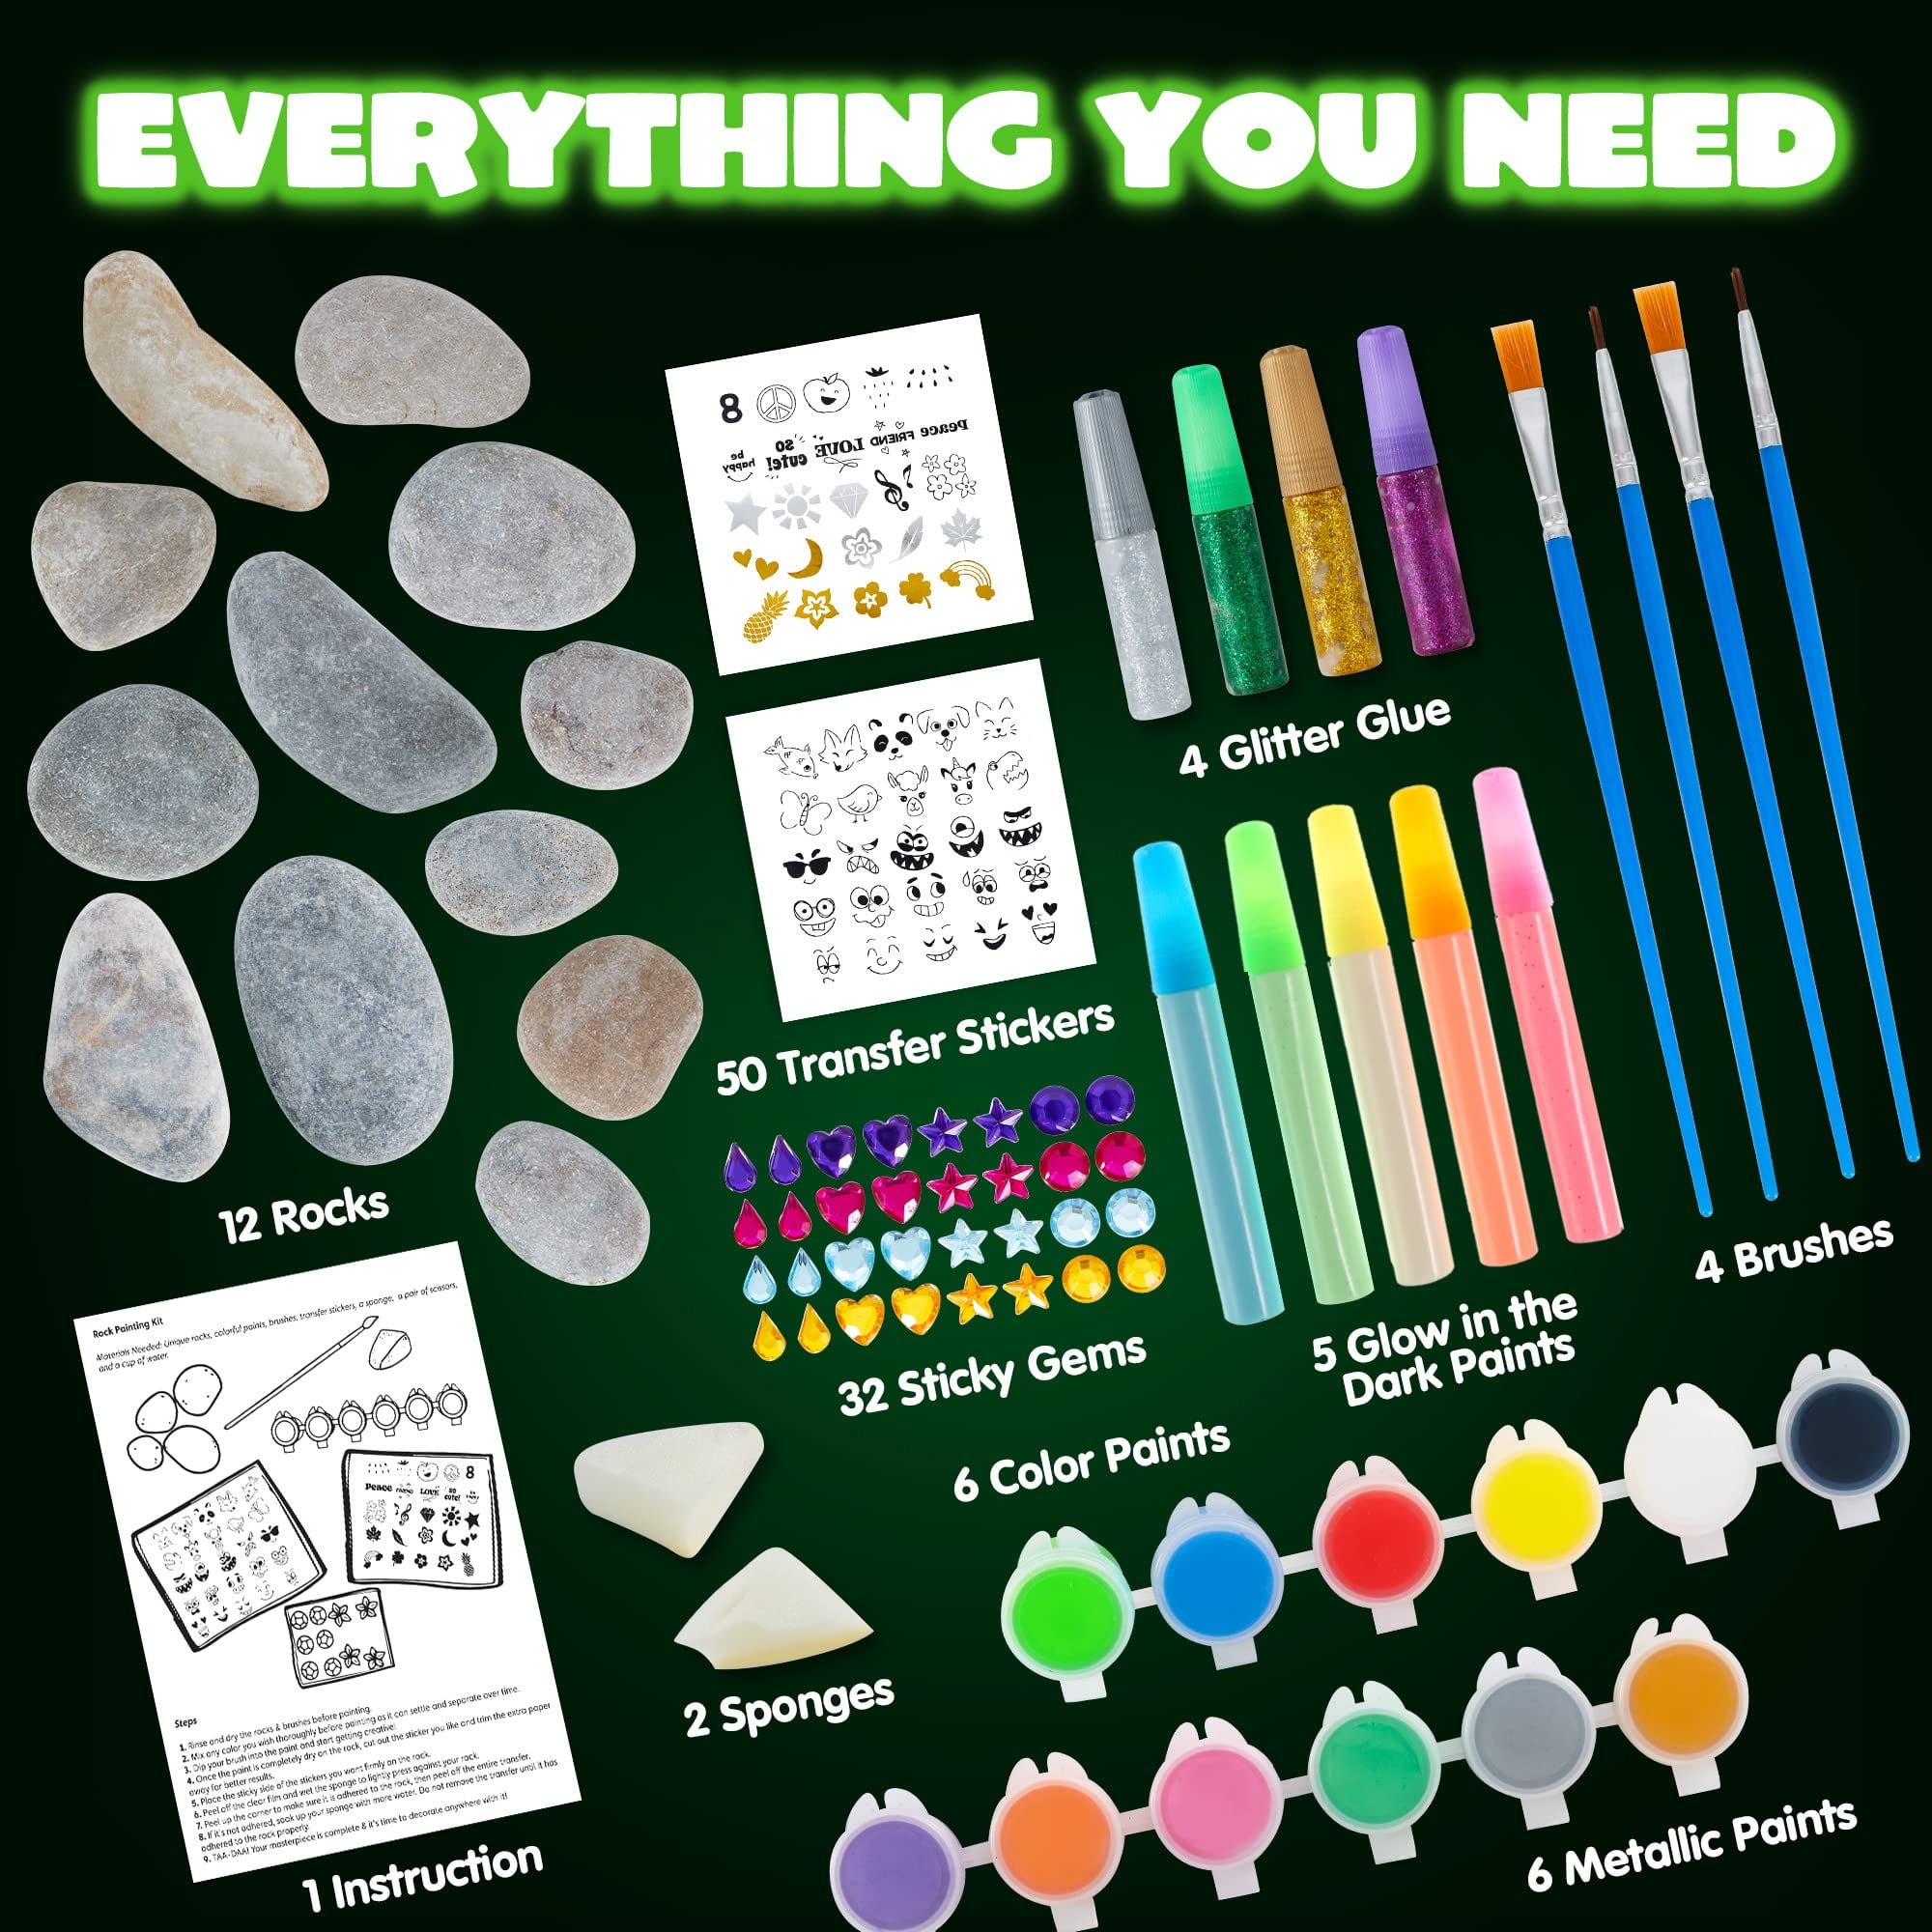 JOYIN 12 Rock Painting Kit & 13 Wooden Magnet Painting Kit, Arts and Crafts  for Kids Ages 6-8+, Art Supplies with Various Paints, Craft Paint Kits